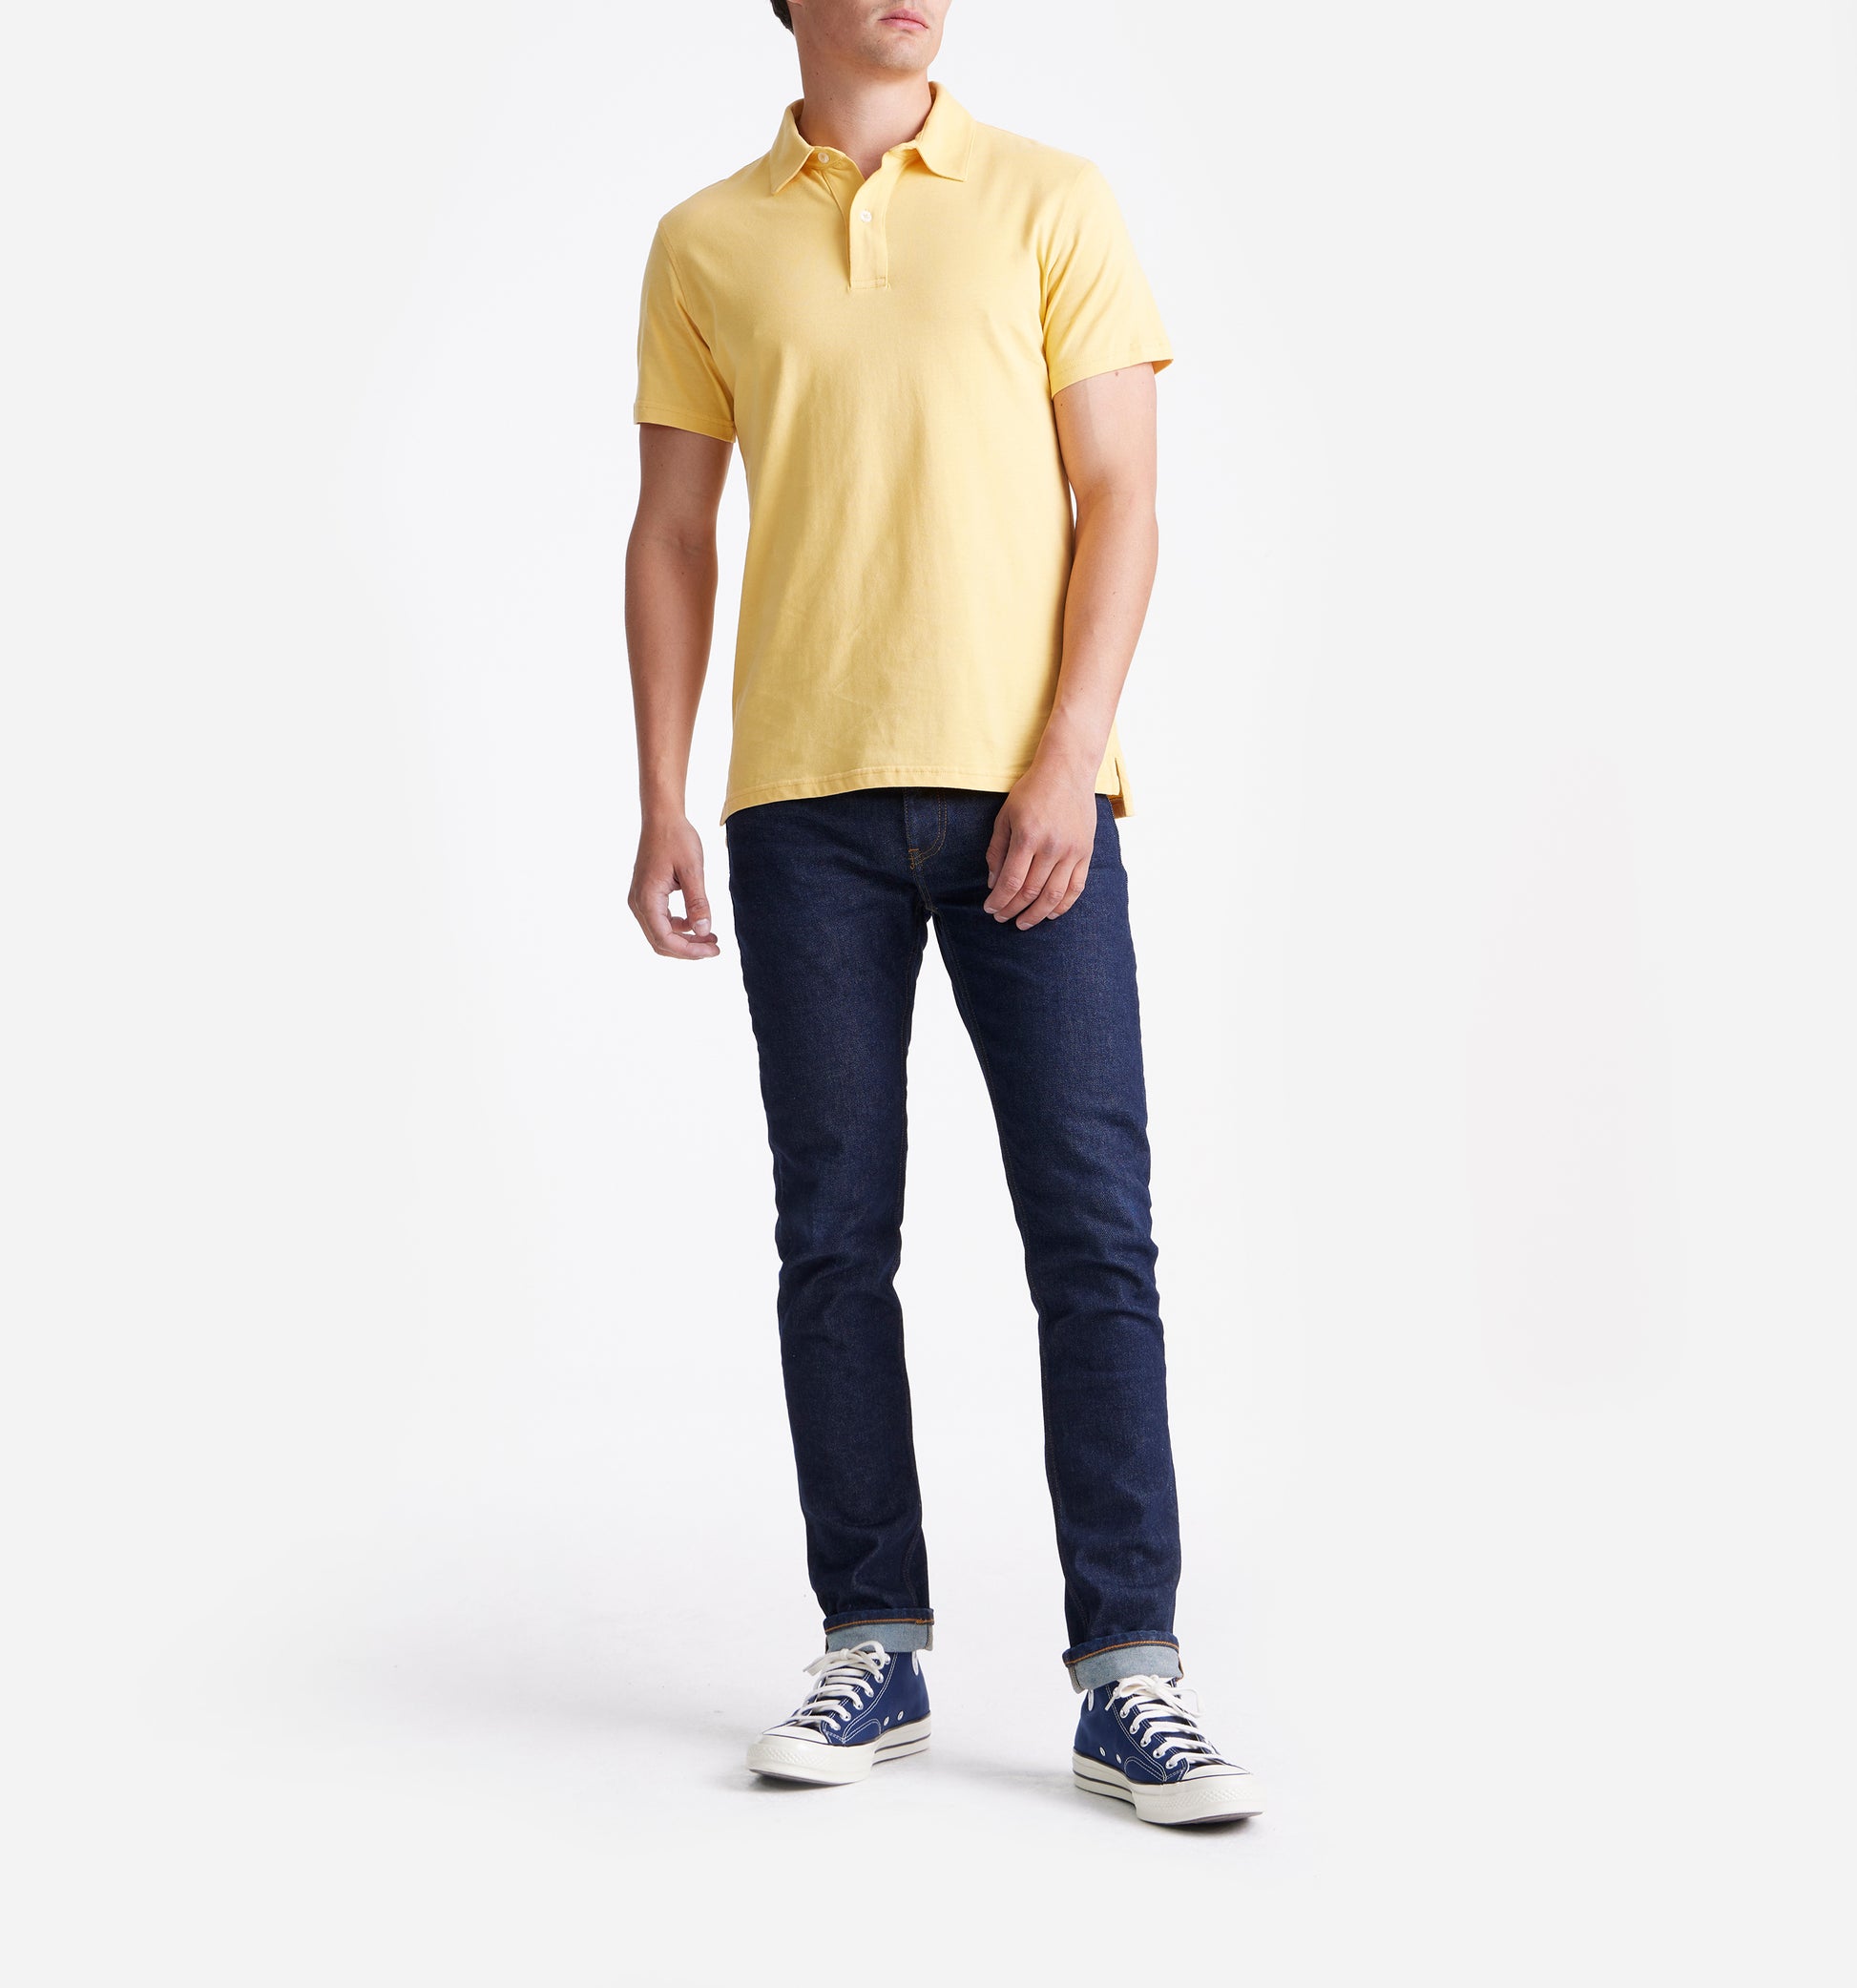 The James - Jersey Cotton Polo In Dark Yellow From King Essentials